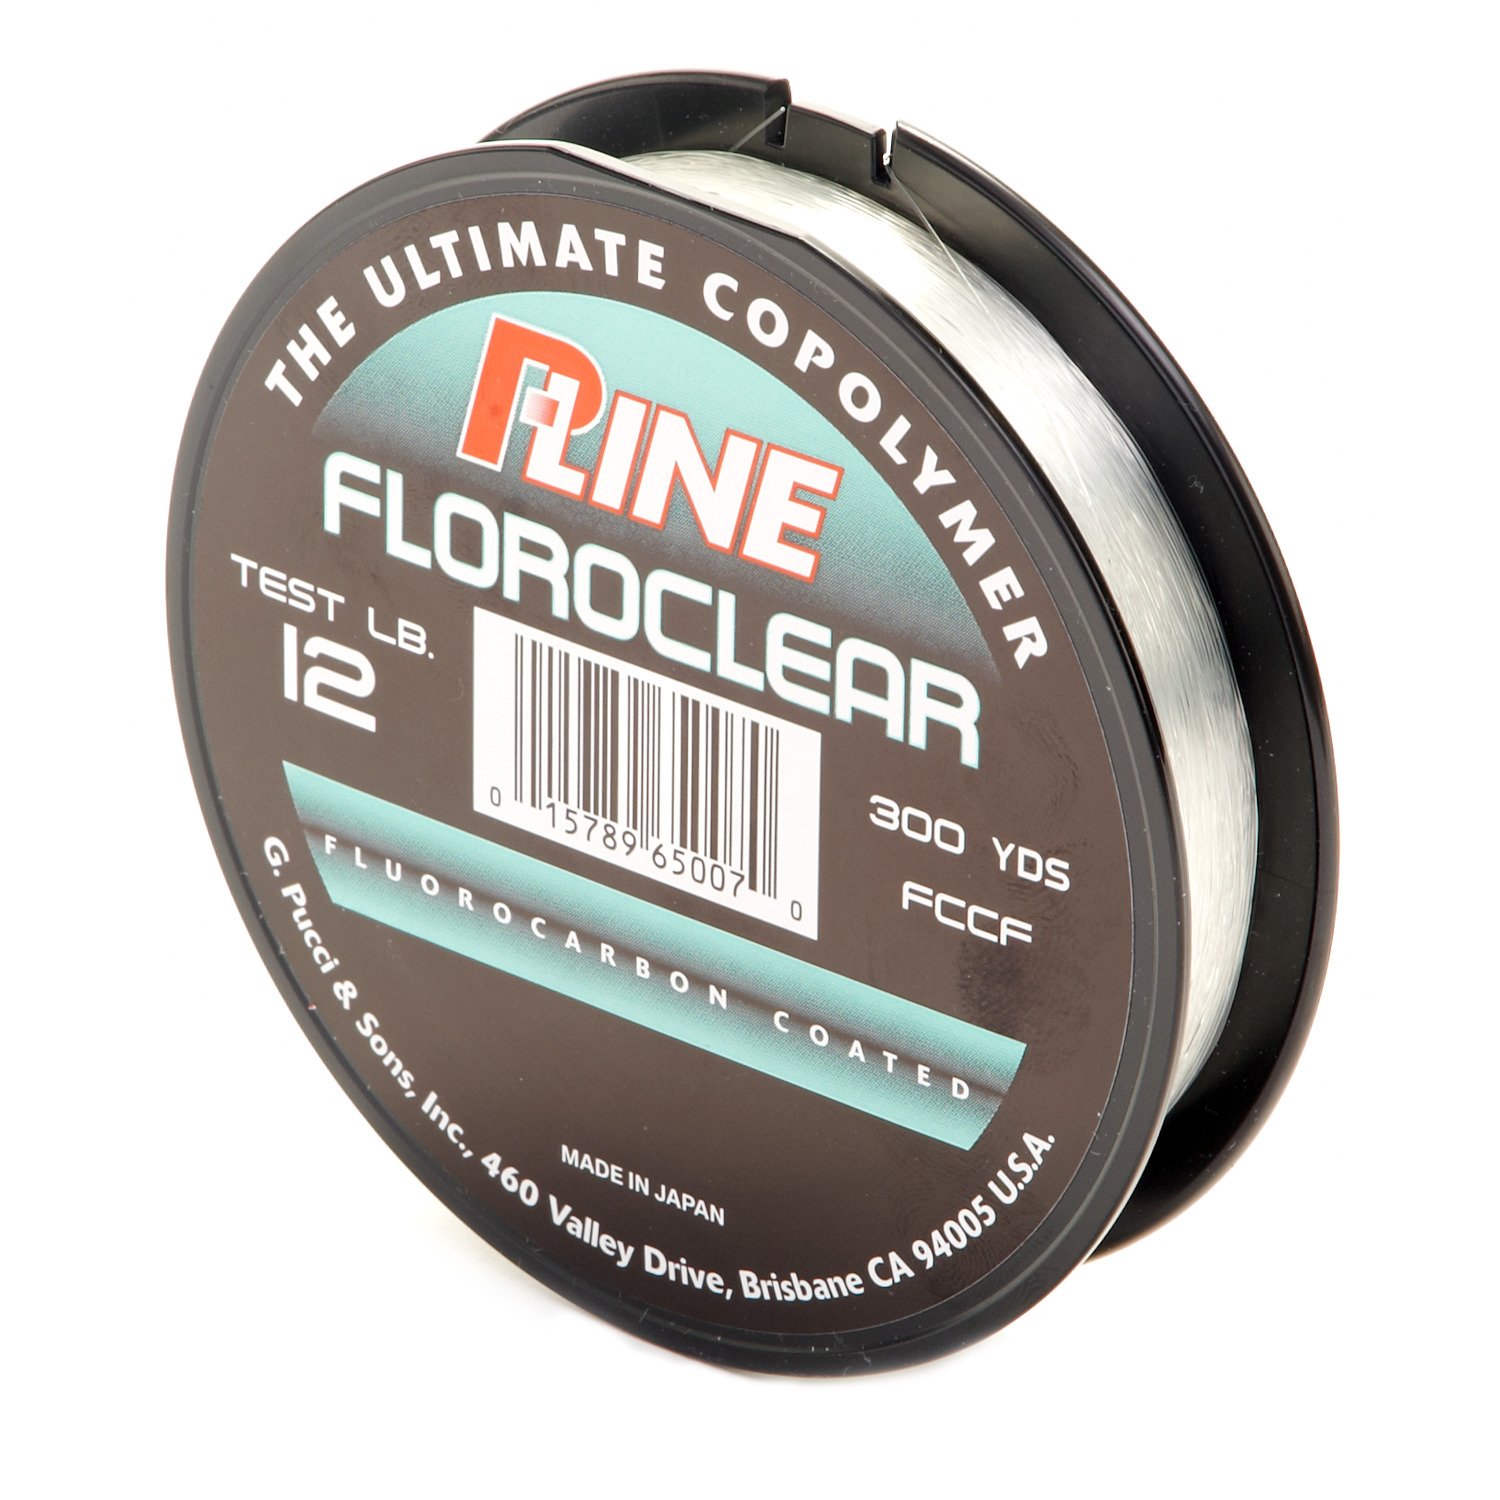 RUNCL Fluorocarbon Fishing Line, PowerFluoro Clear India